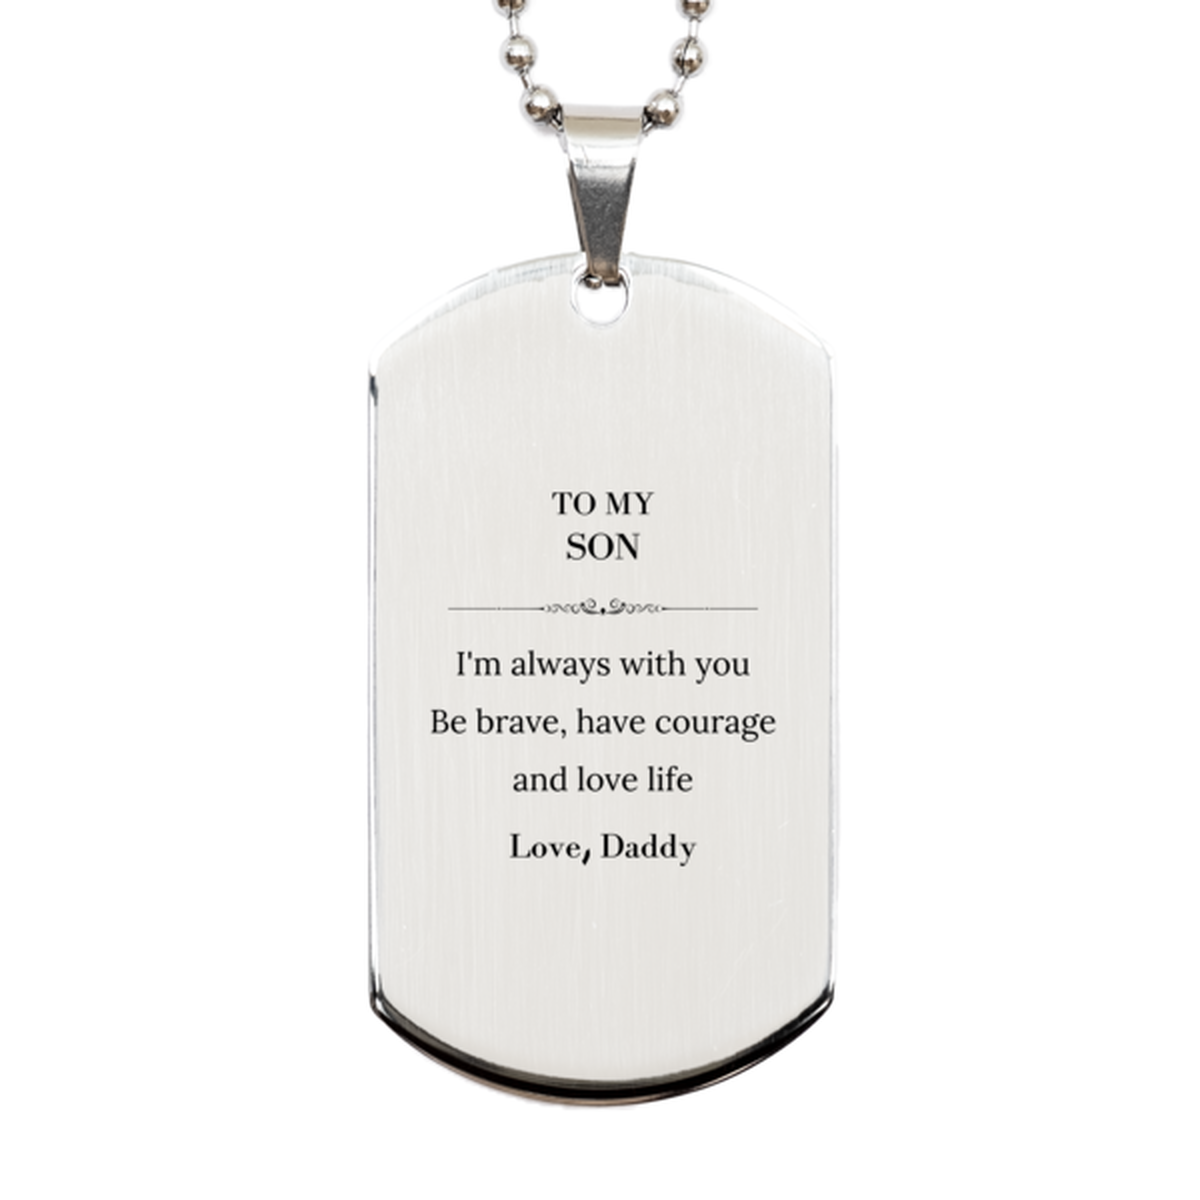 To My Son Gifts from Daddy, Unique Silver Dog Tag Inspirational Christmas Birthday Graduation Gifts for Son I'm always with you. Be brave, have courage and love life. Love, Daddy